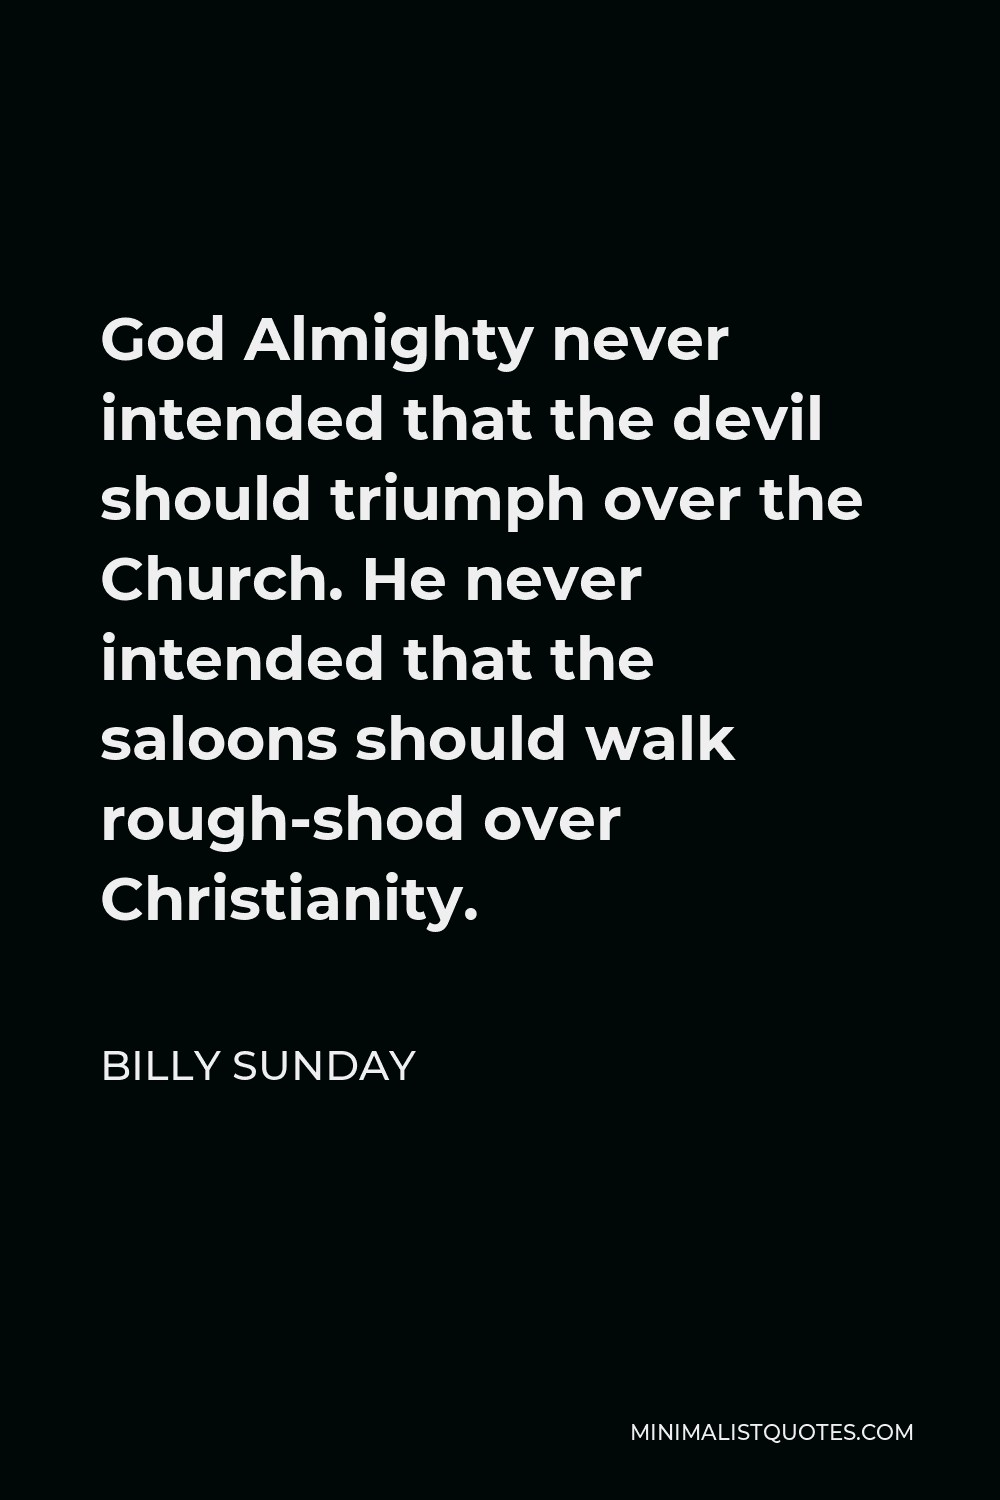 Billy Sunday Quote - God Almighty never intended that the devil should triumph over the Church. He never intended that the saloons should walk rough-shod over Christianity.